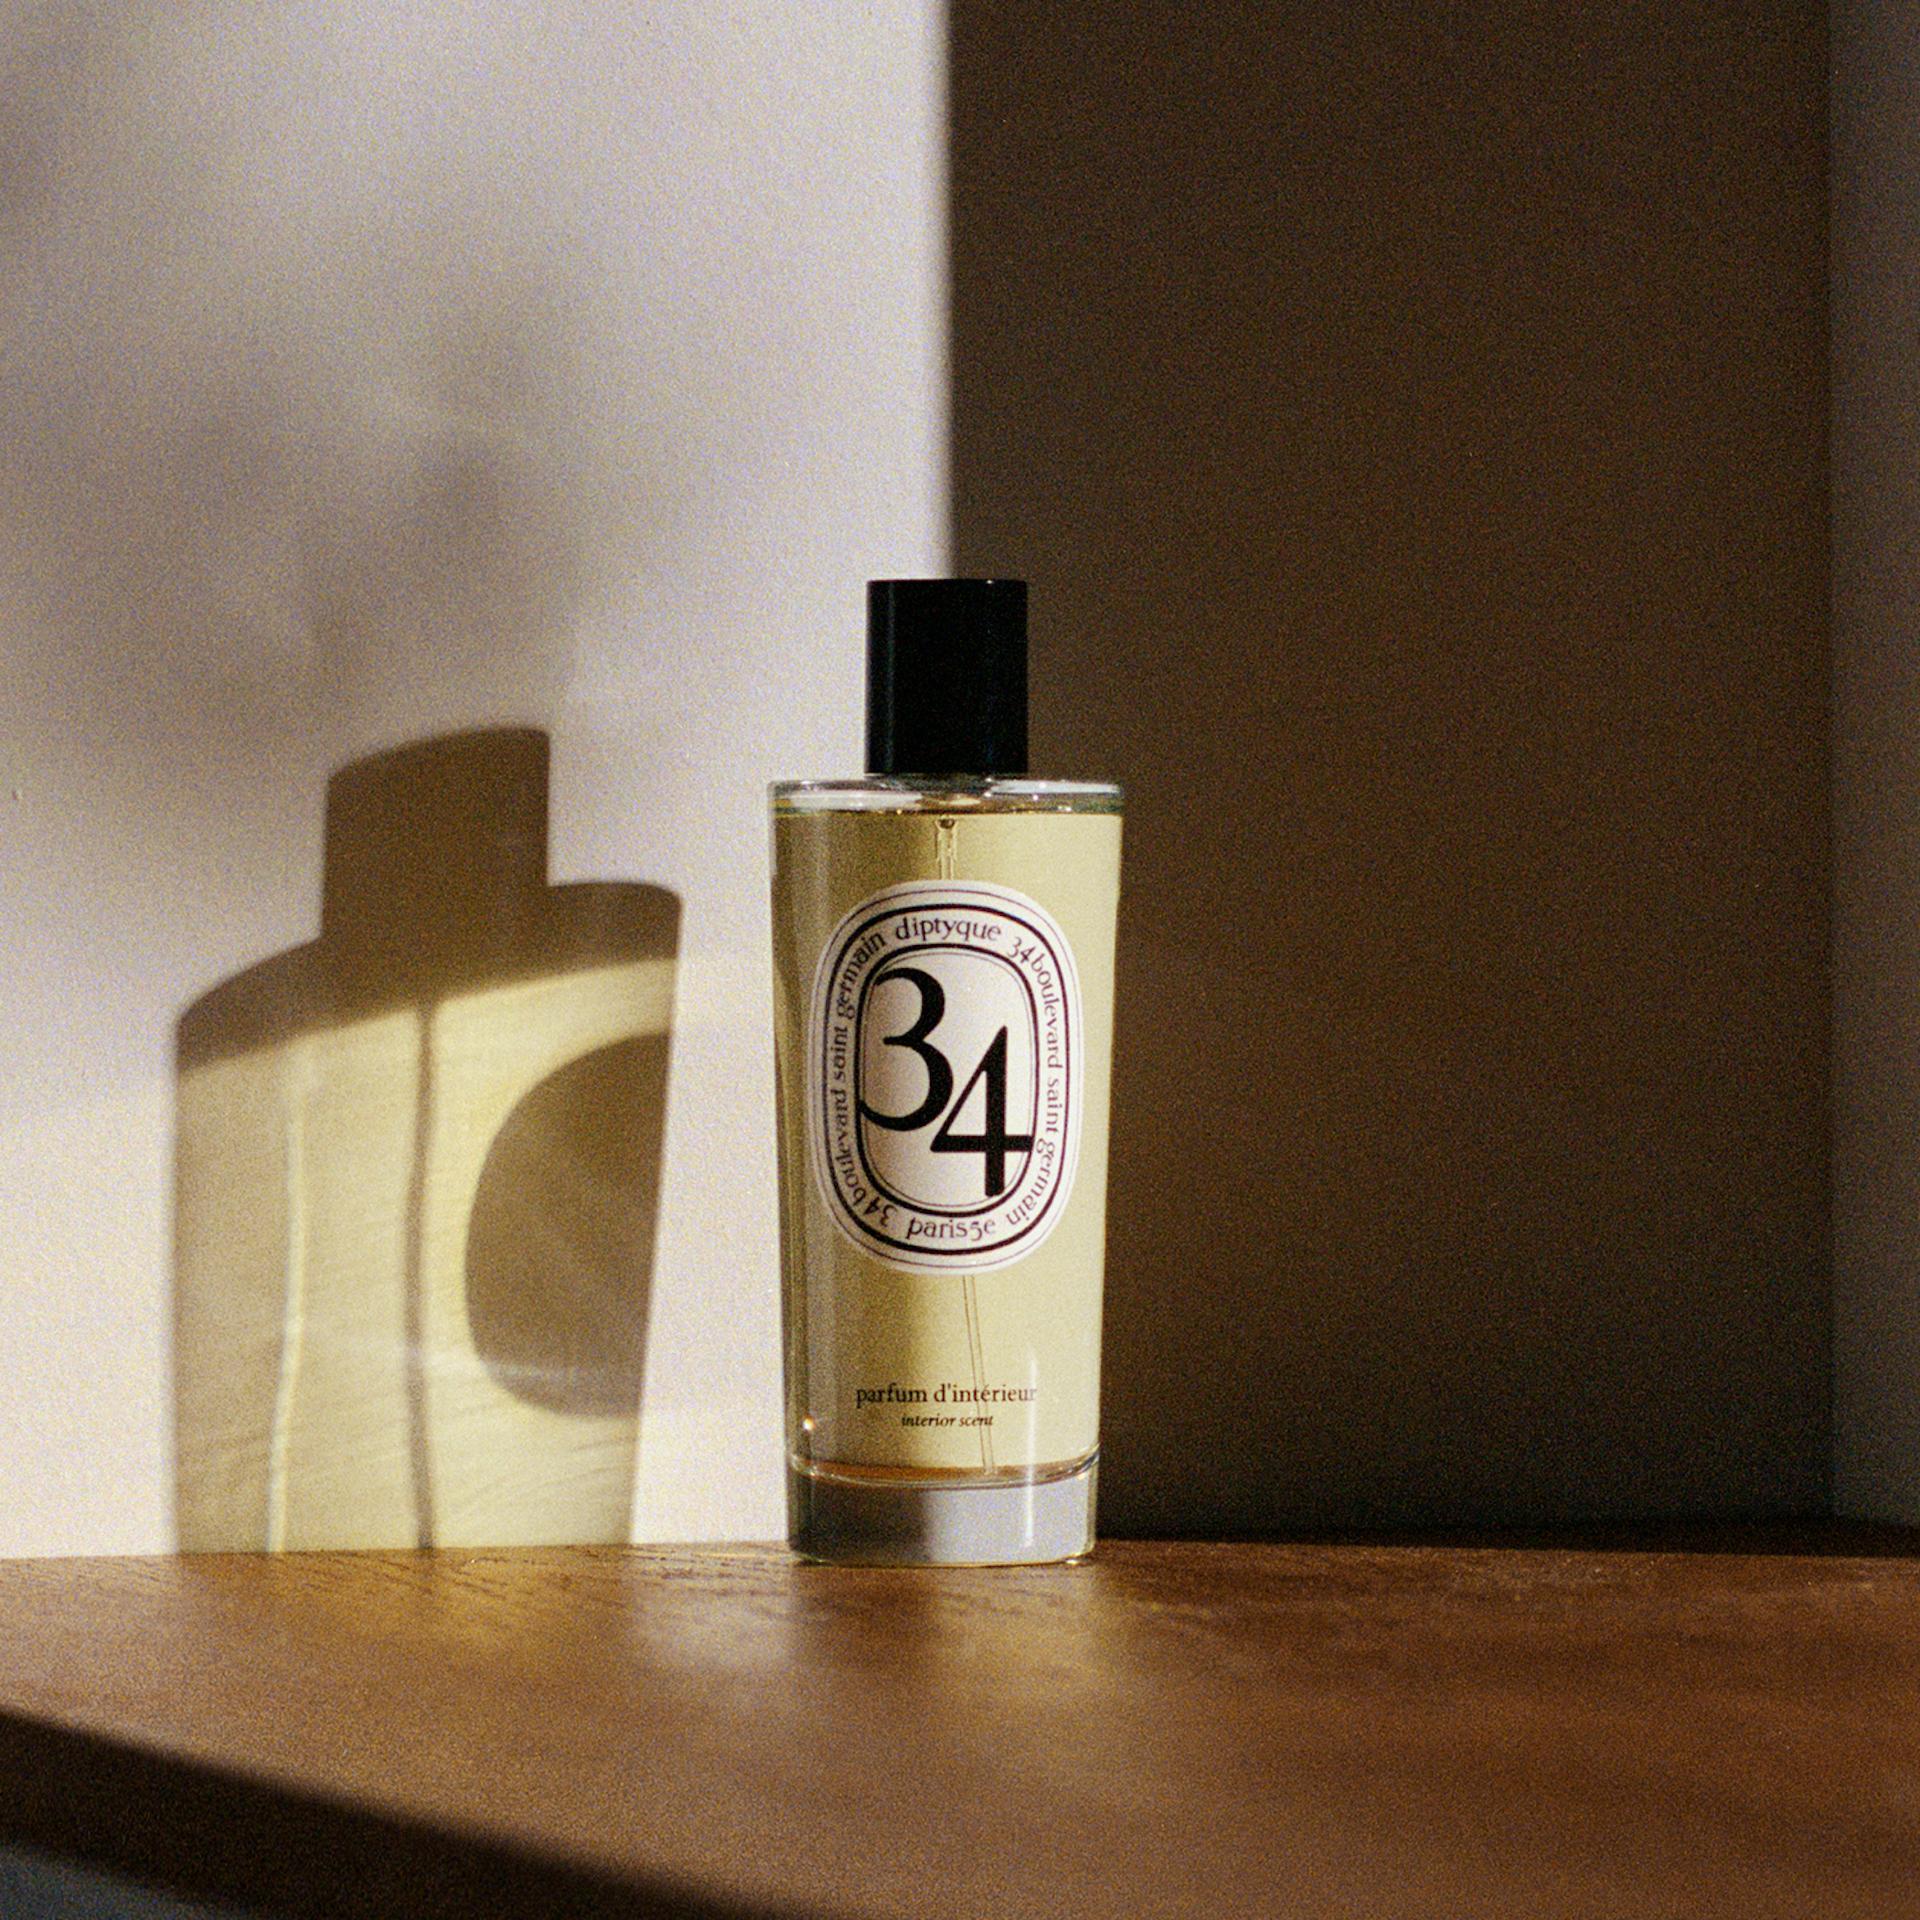 Diptyque 34 Collection’s Latest Additions Recall the Maison’s Iconic Paris Shop